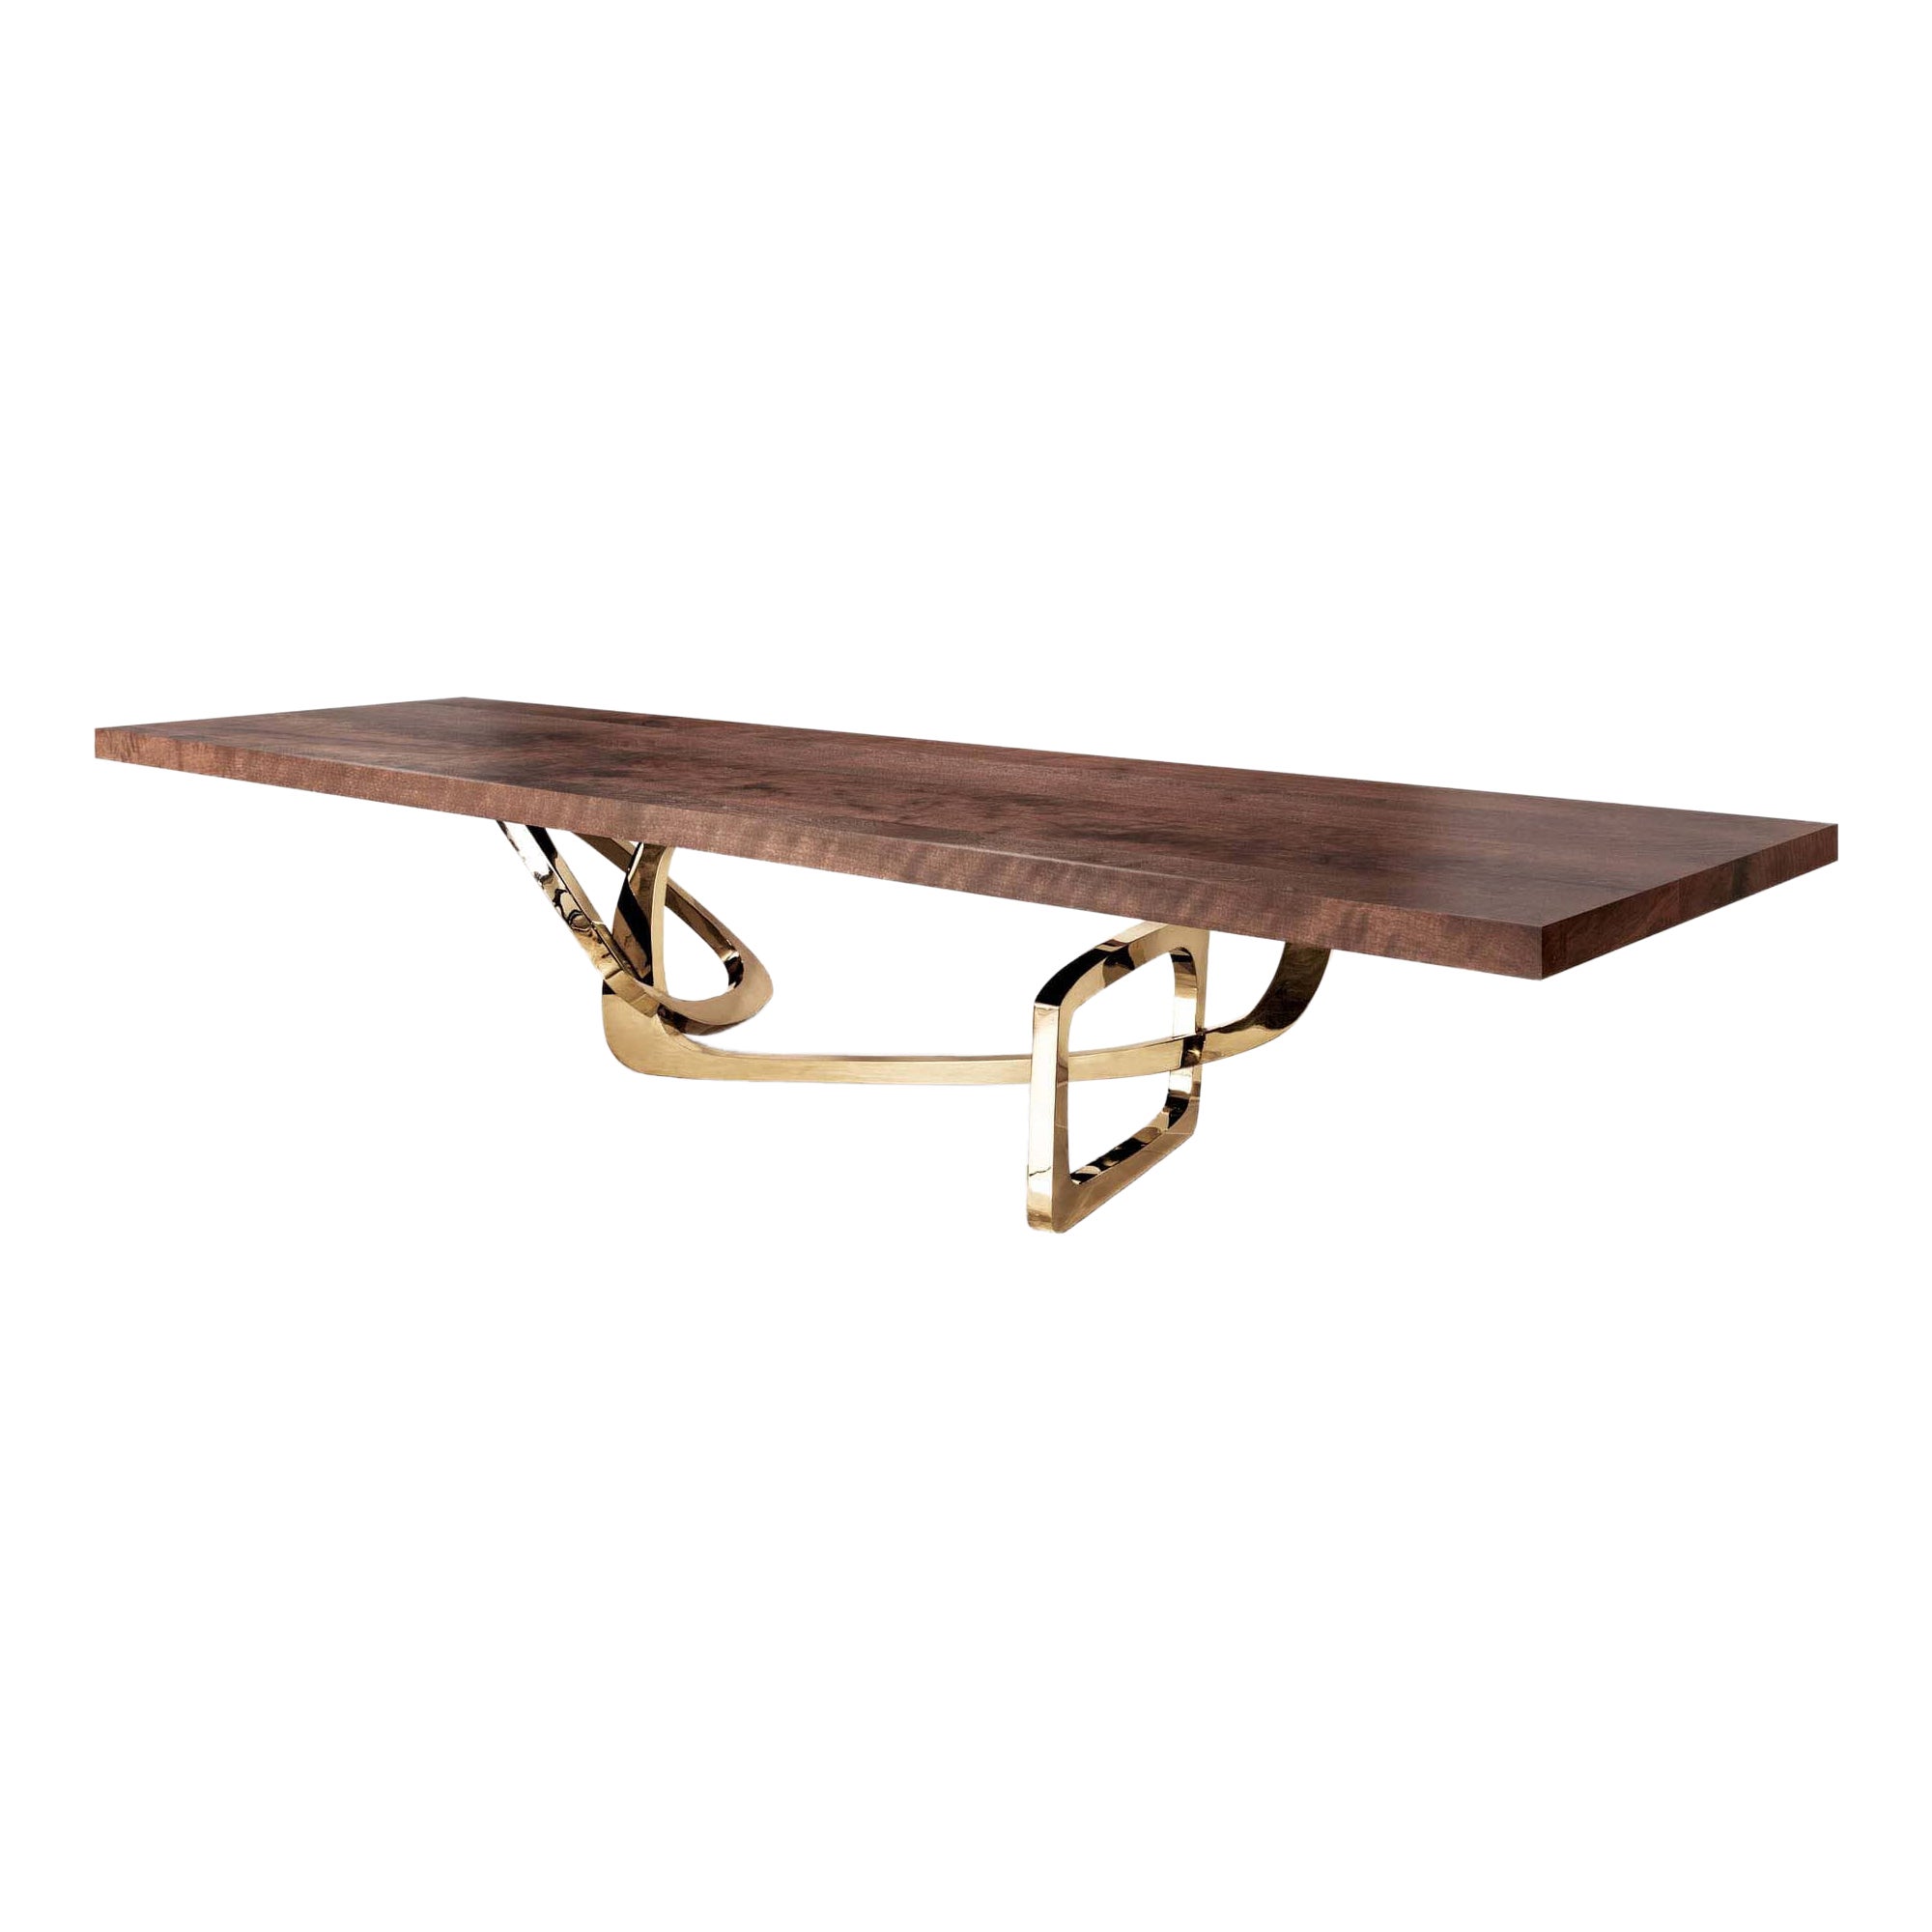 Bangle Dining Table: Bespoke Dining Table Bronze Base Seamed Walnut Top